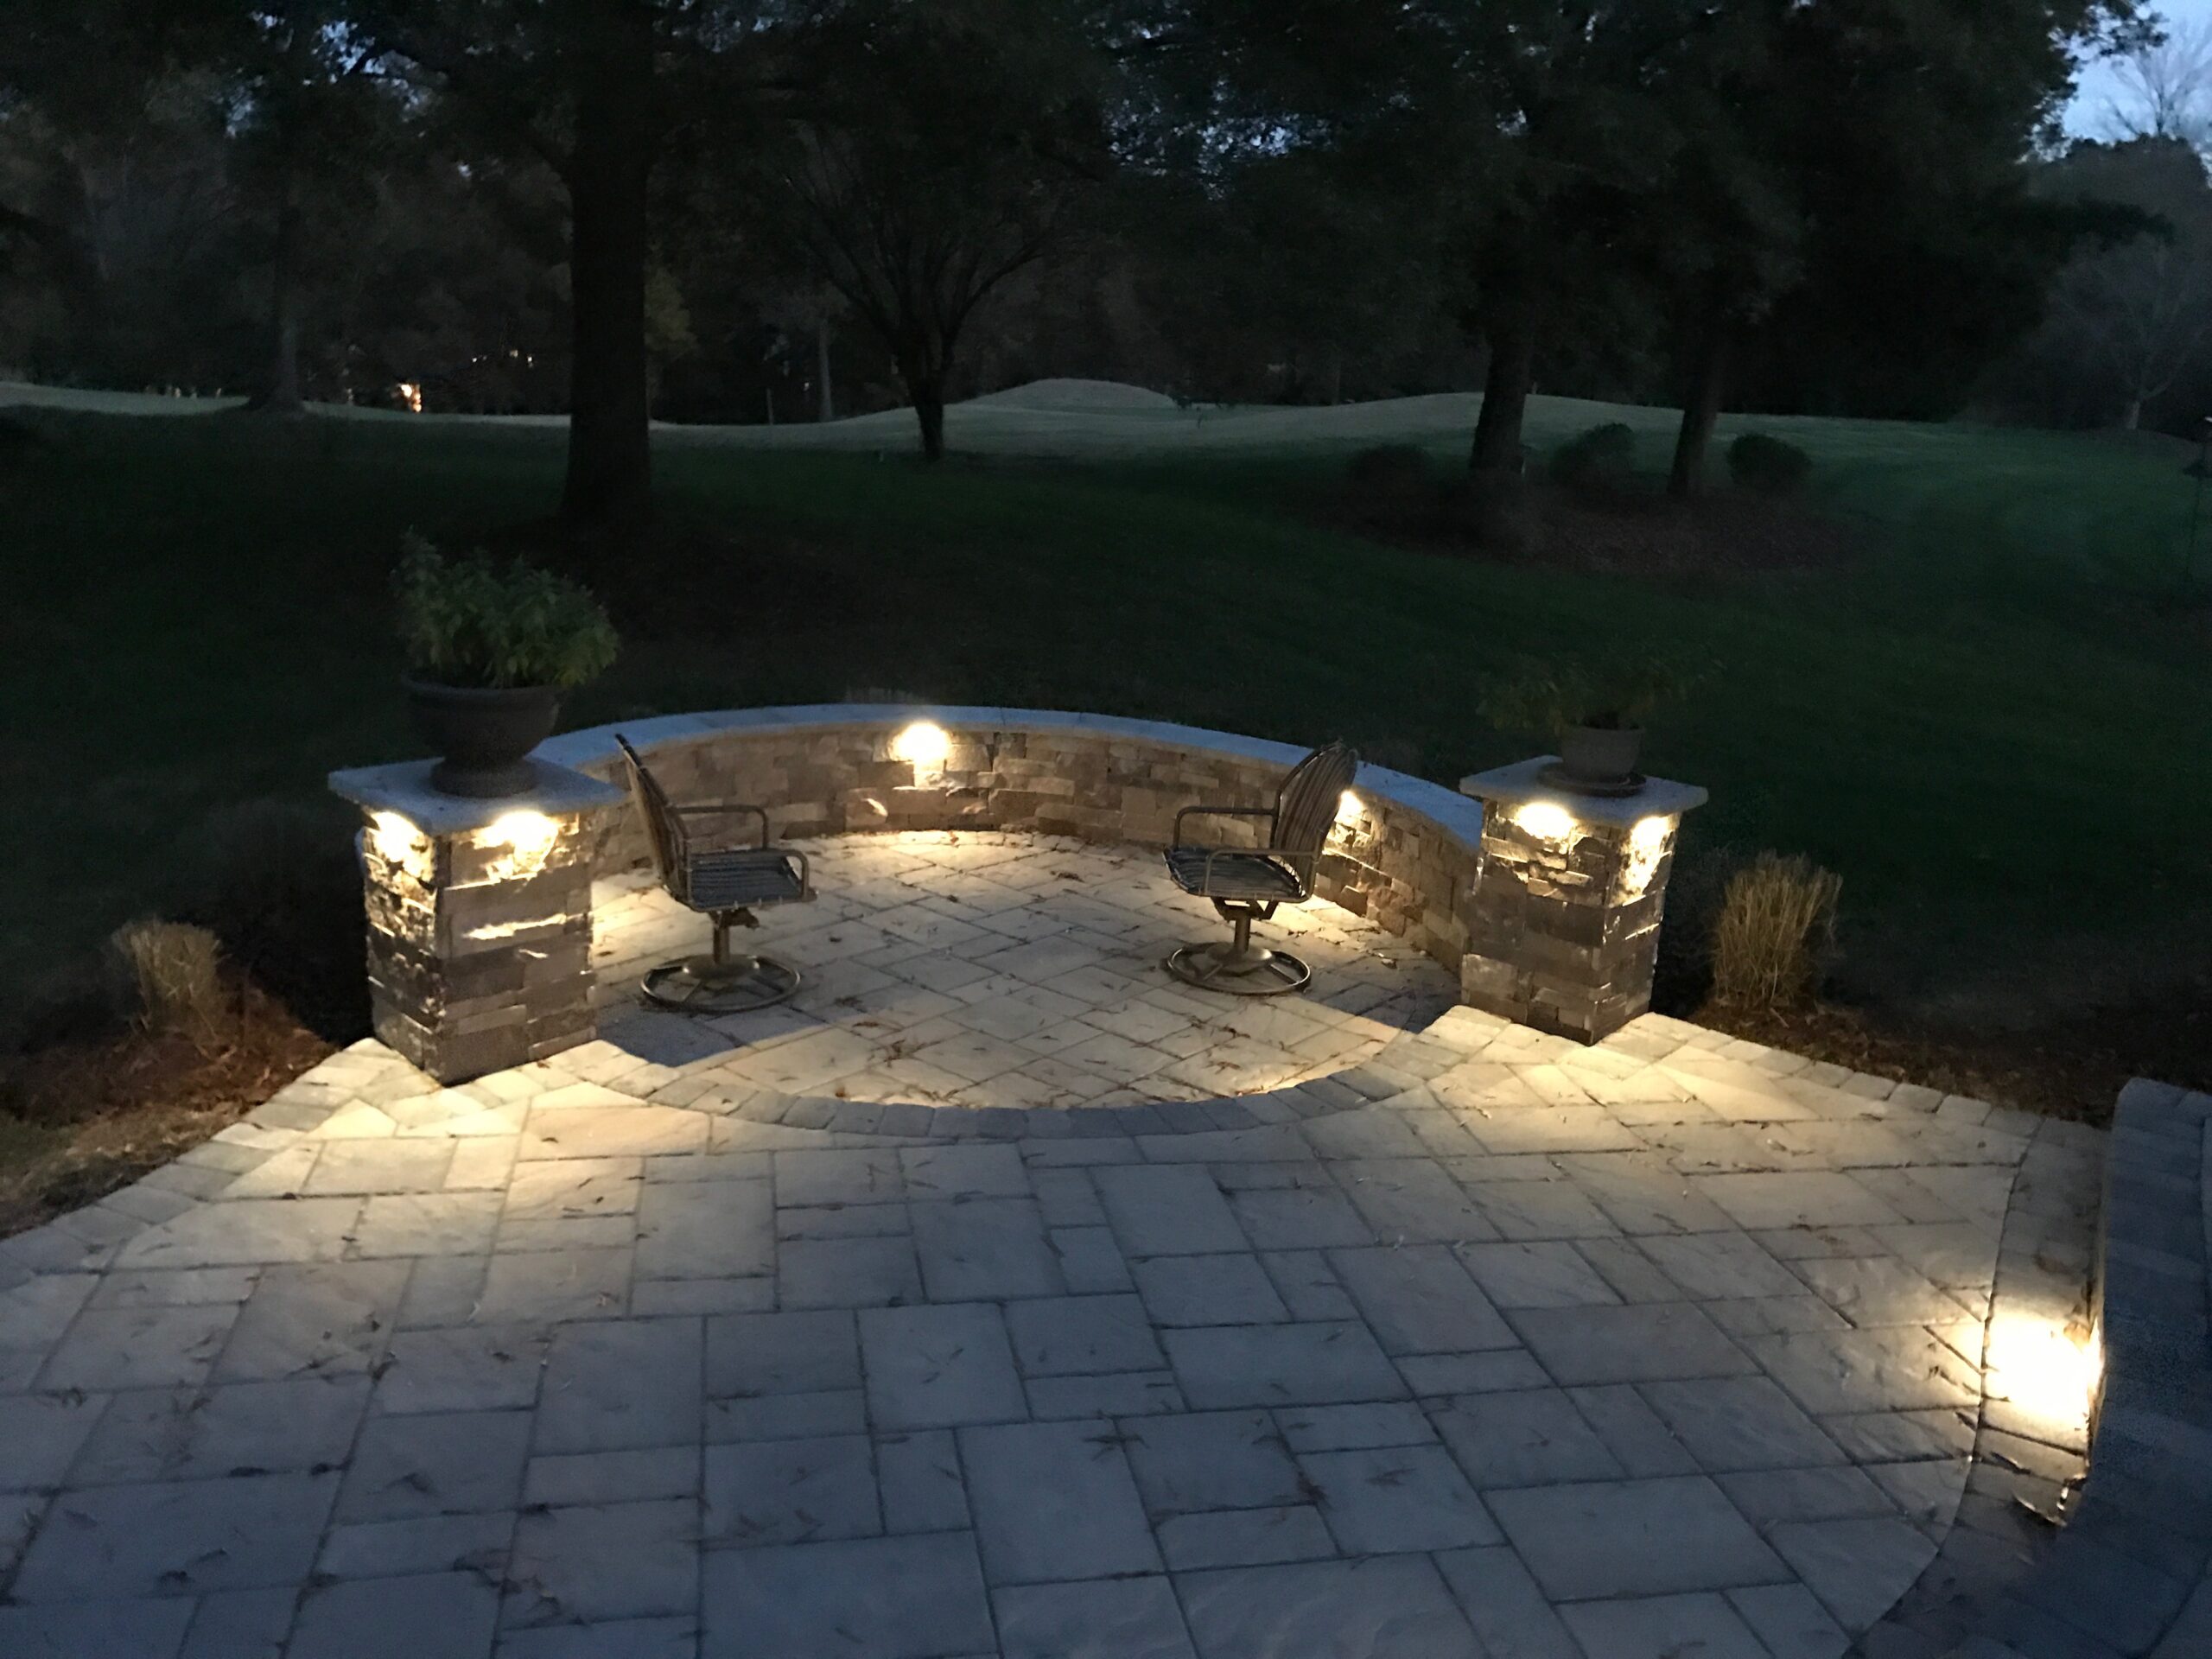 A beautiful and well done stone pavement with a stone sitting wall, embed outdoor lightning and chairs at the bottom of the photo.